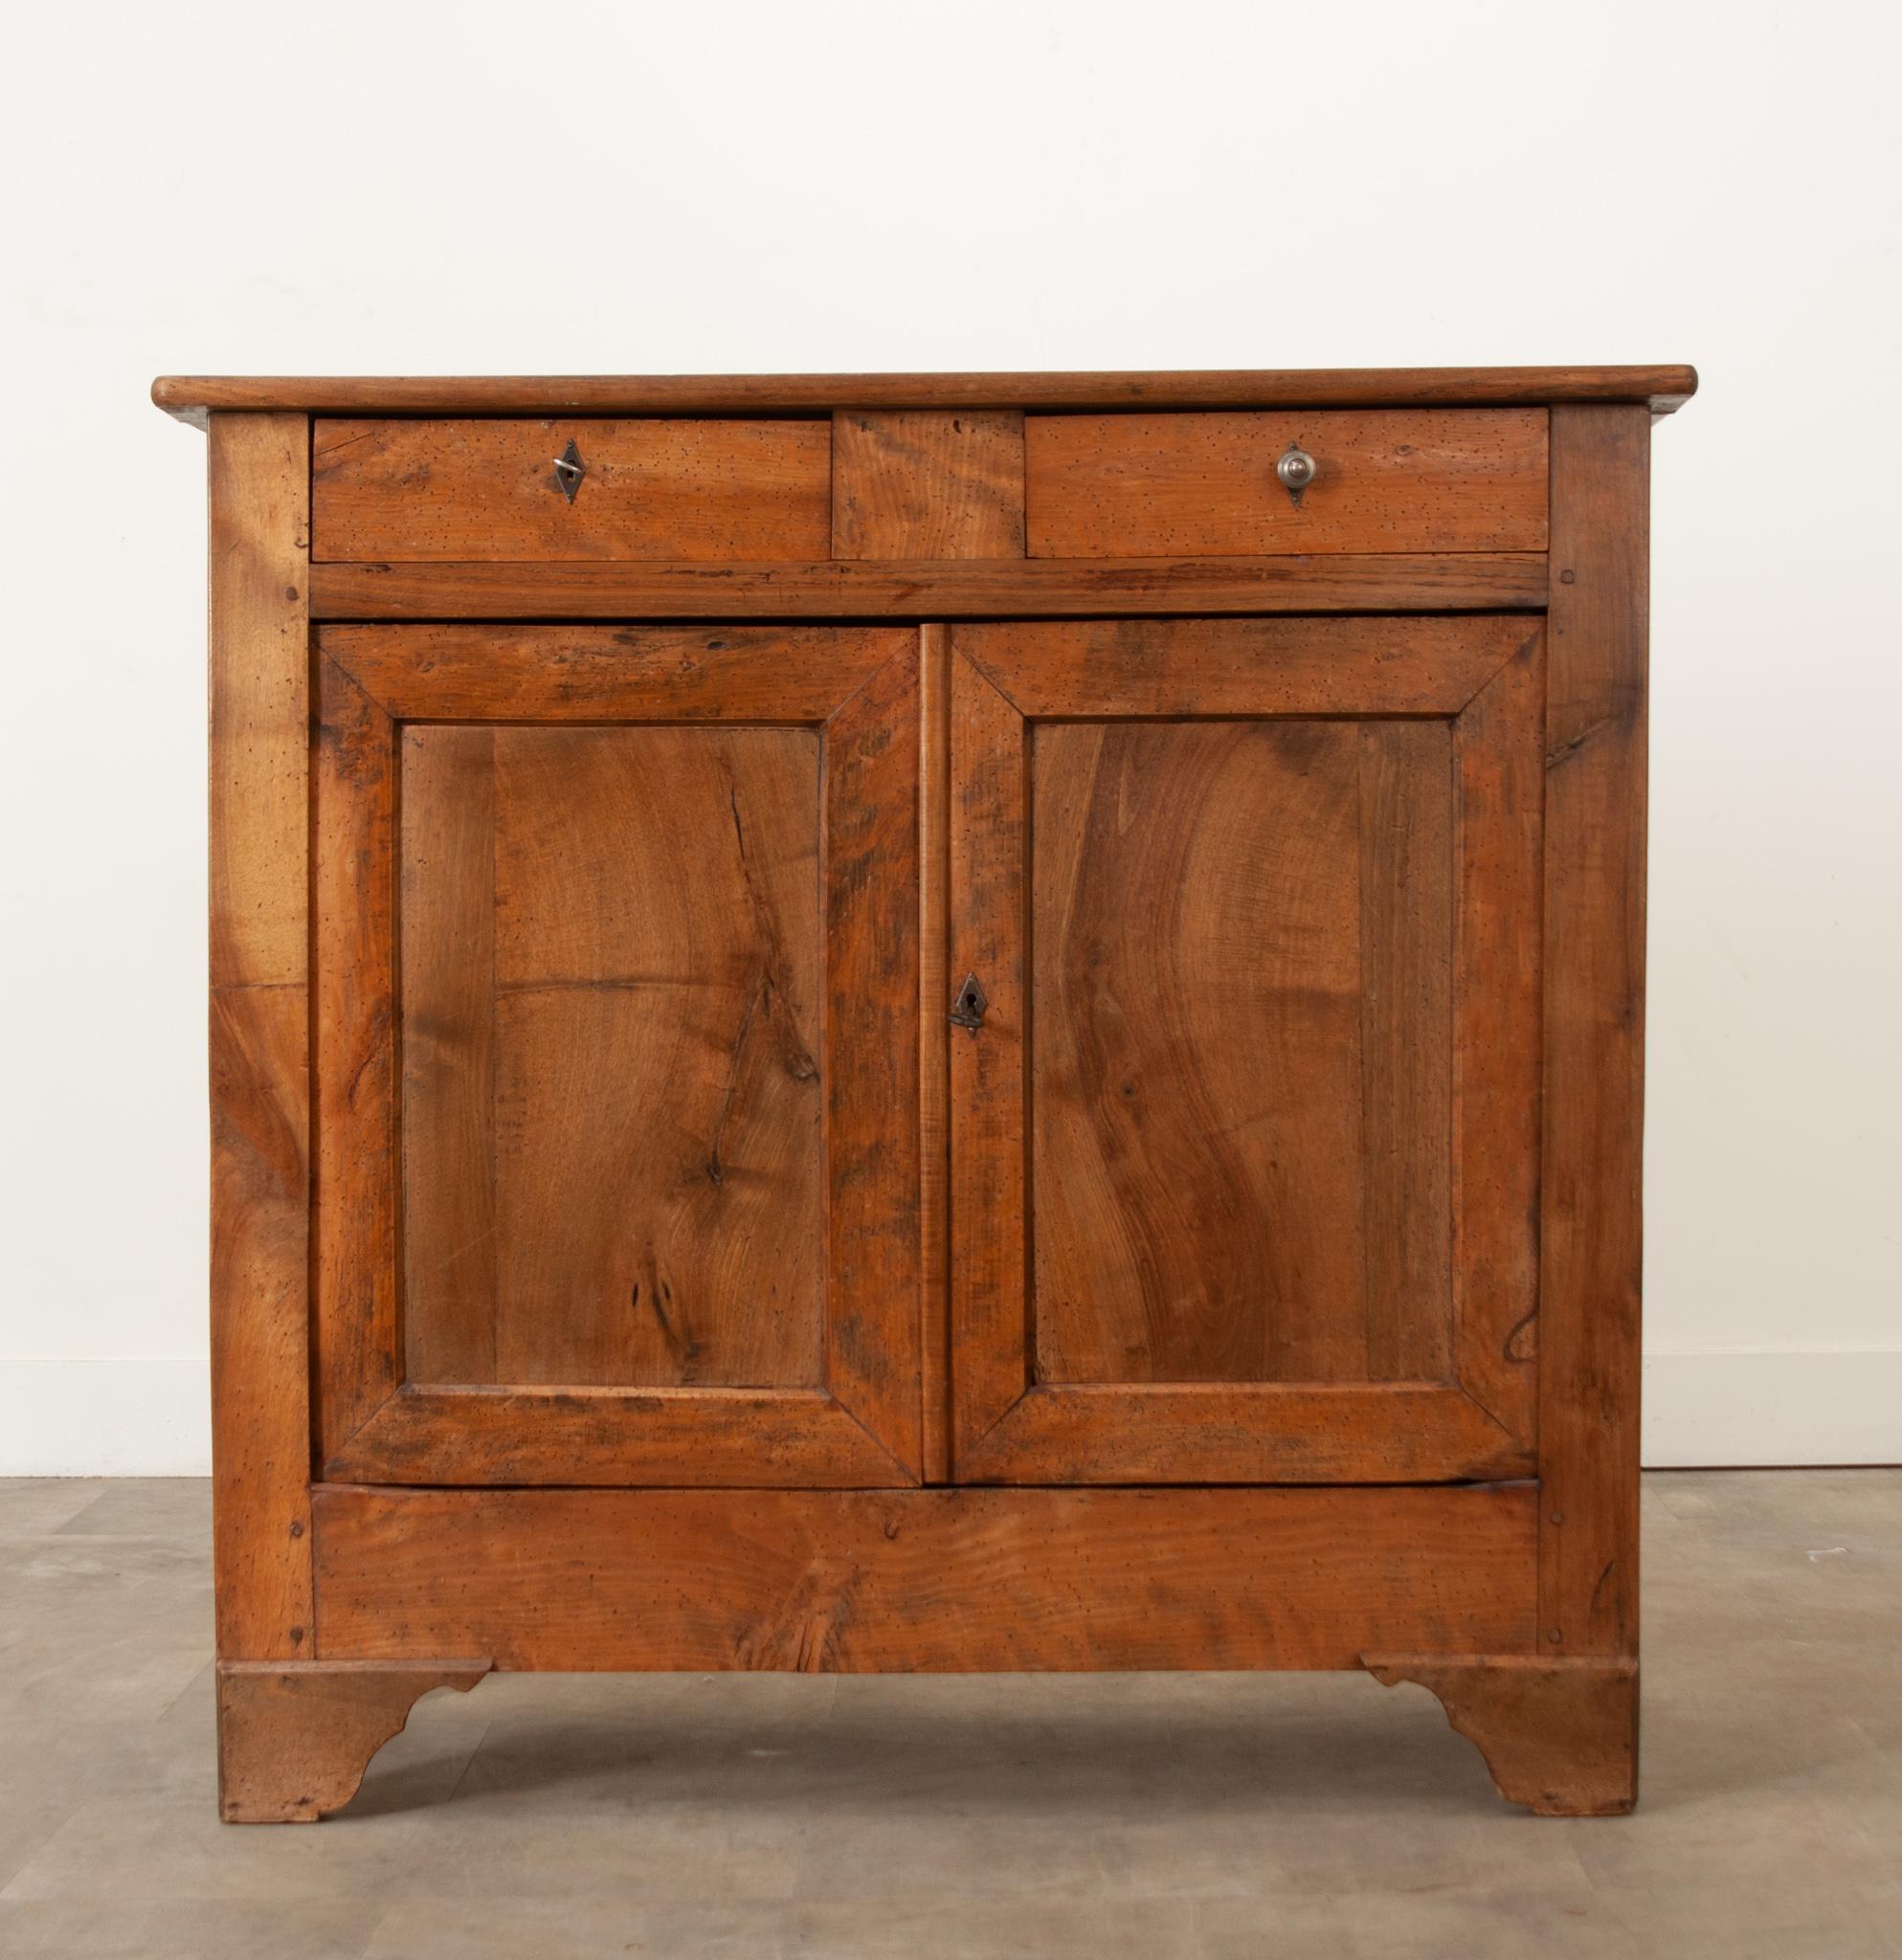 A delightful, tall French Louis Philippe buffet composed of solid walnut, pine and oak. This lightly toned buffet is designed with clean, straight lines, making this - and all Louis Philippe style pieces - extraordinarily versatile. The buffet has